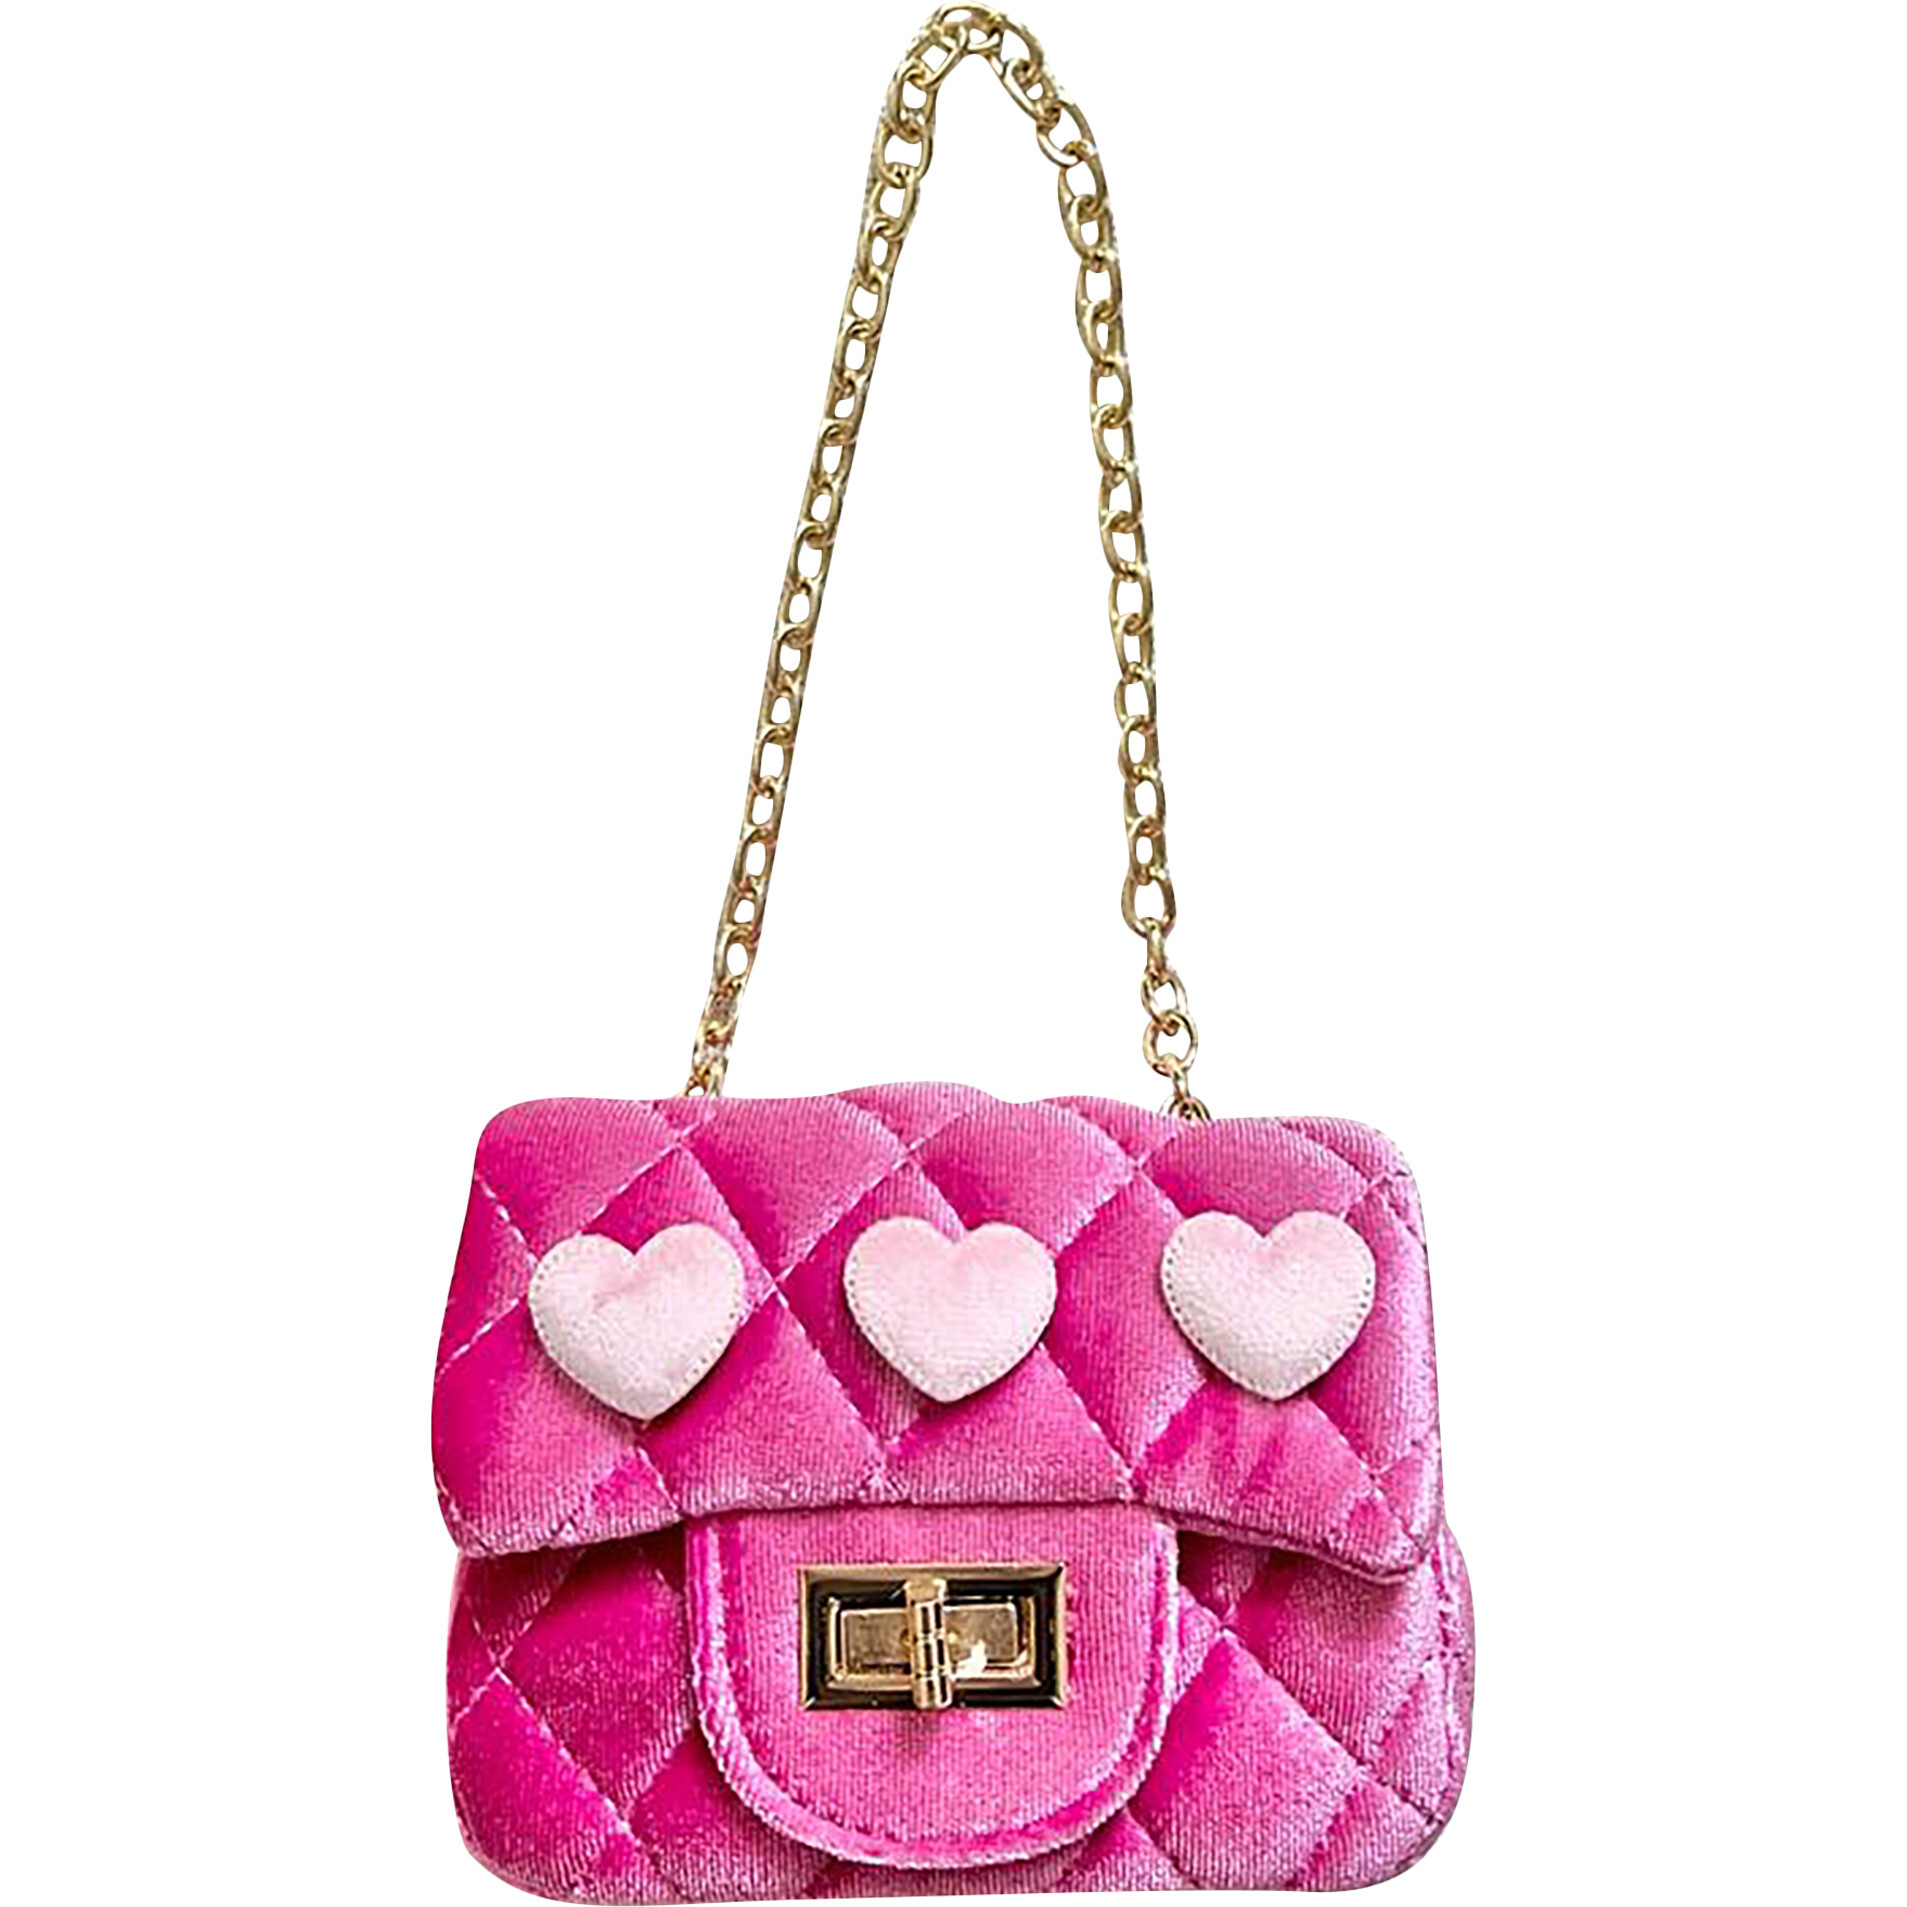 Velvet Purse With Heart Patches, Hot Pink - Ce Ce Co. Bags